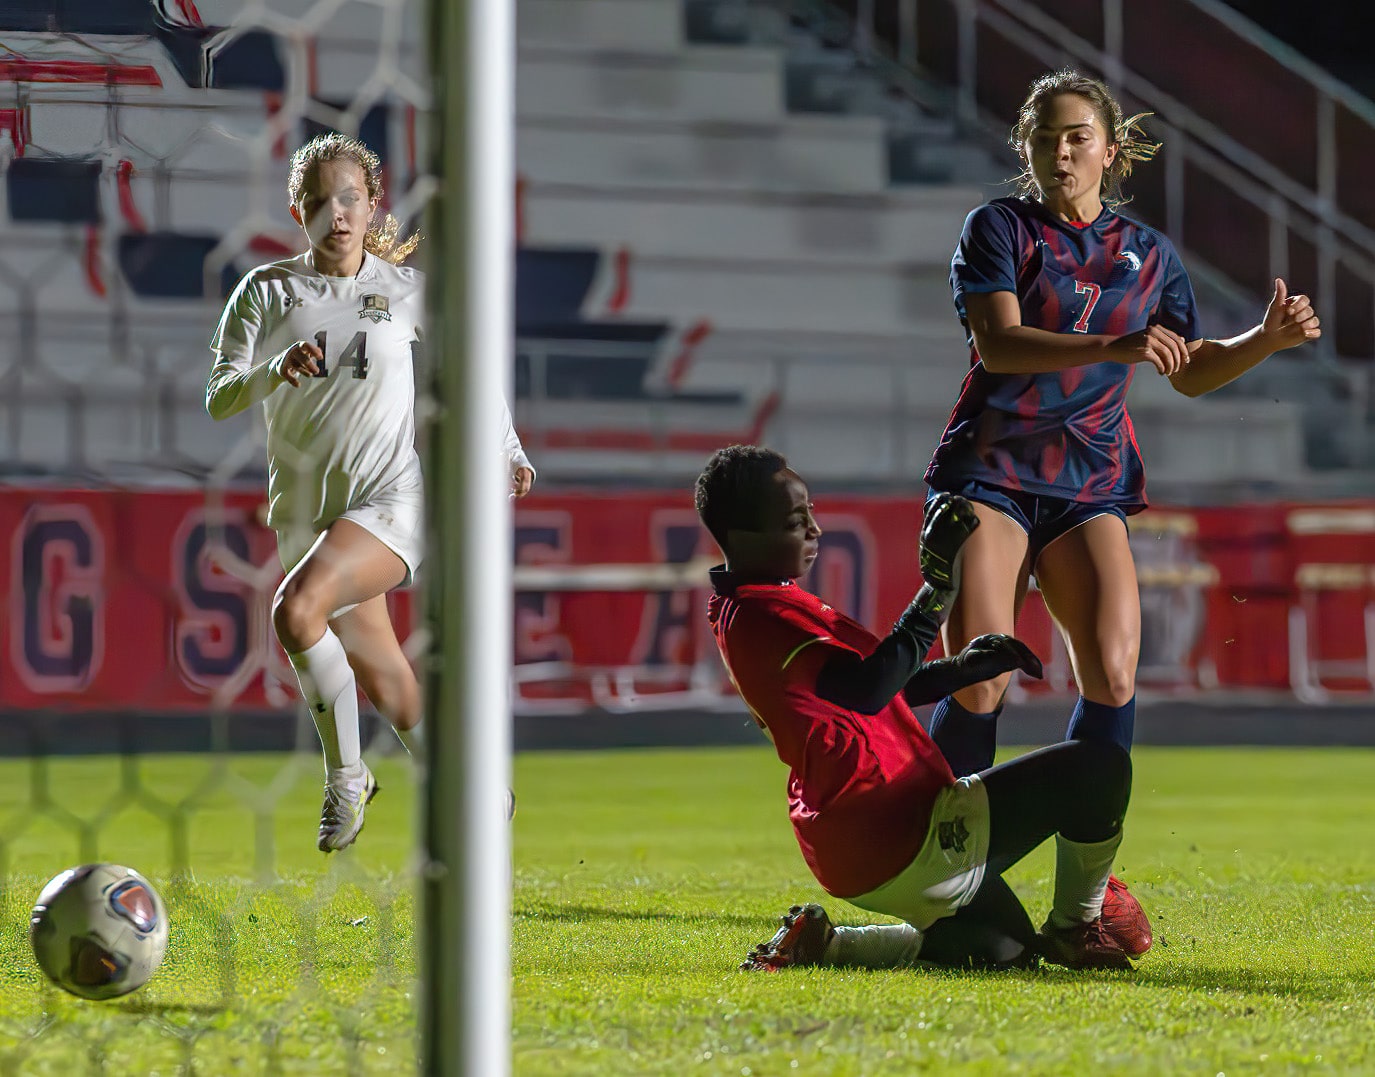 Springstead High, 7, Ava Kanaar gets a shot past Buchholz High goalkeeper Mimi Fisher. Kanaar scored six times in the 8-0 Eagle win in the 6A District 4 semi-final game in Spring Hill. [Photo by Joe DiCristofalo]